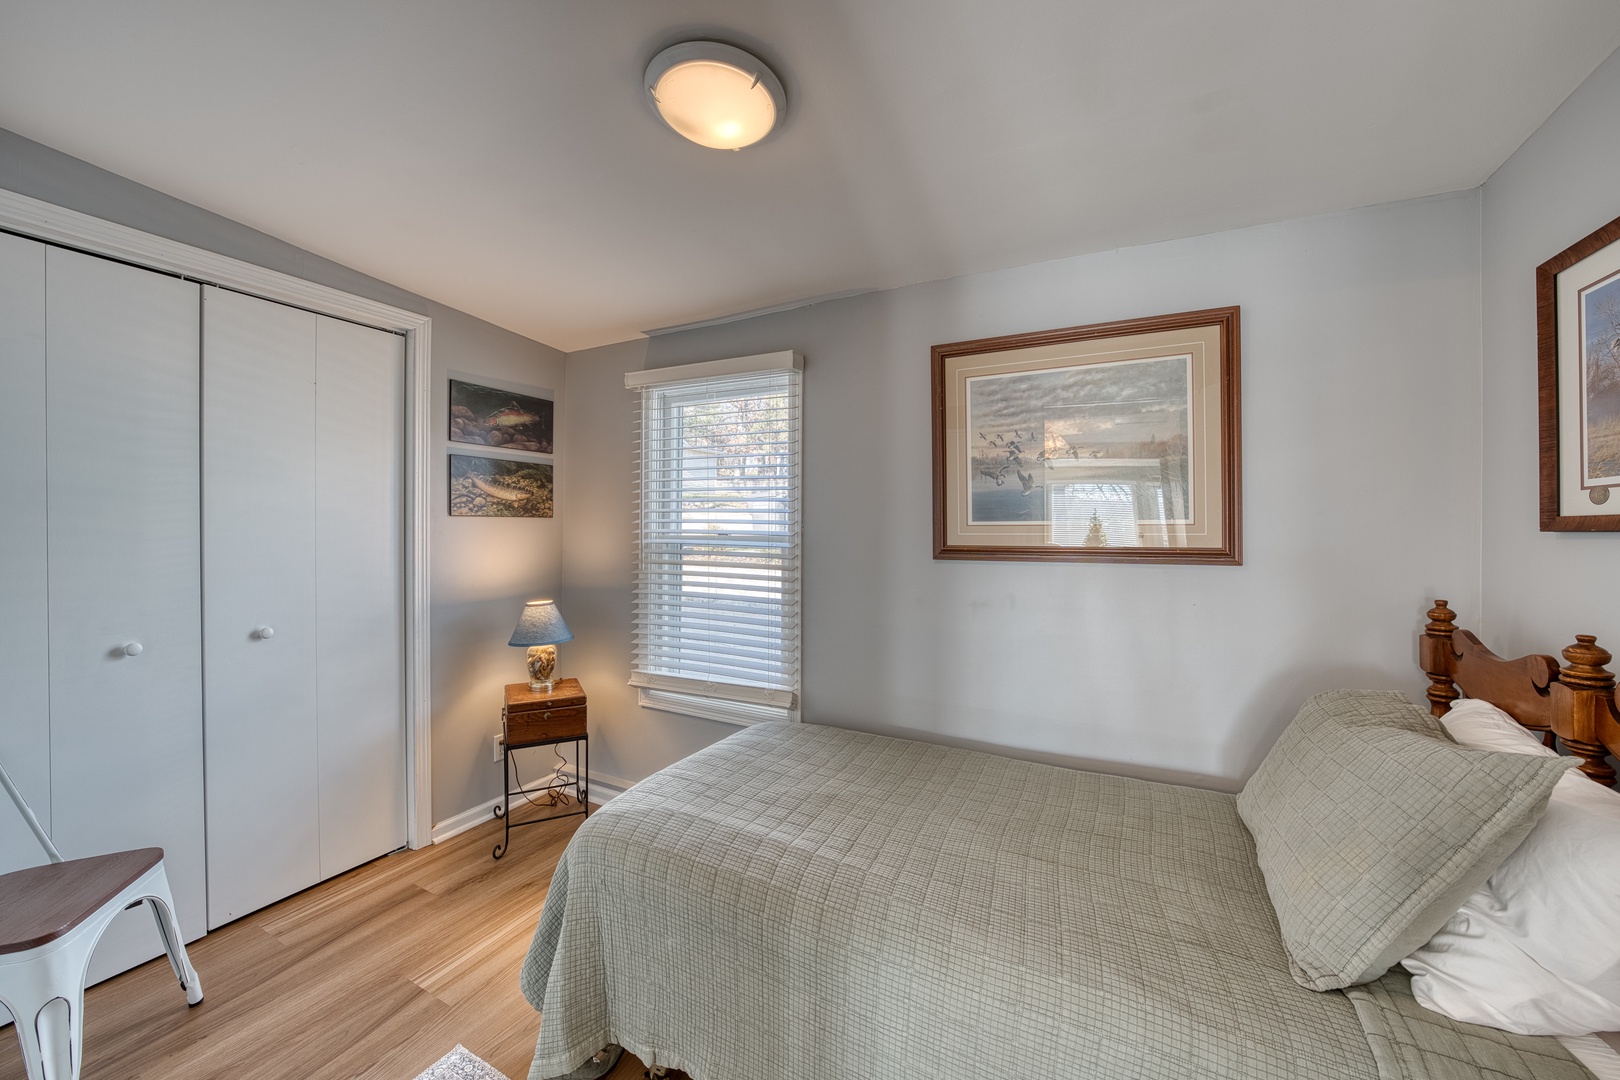 The final bedroom sanctuary includes a cozy twin bed